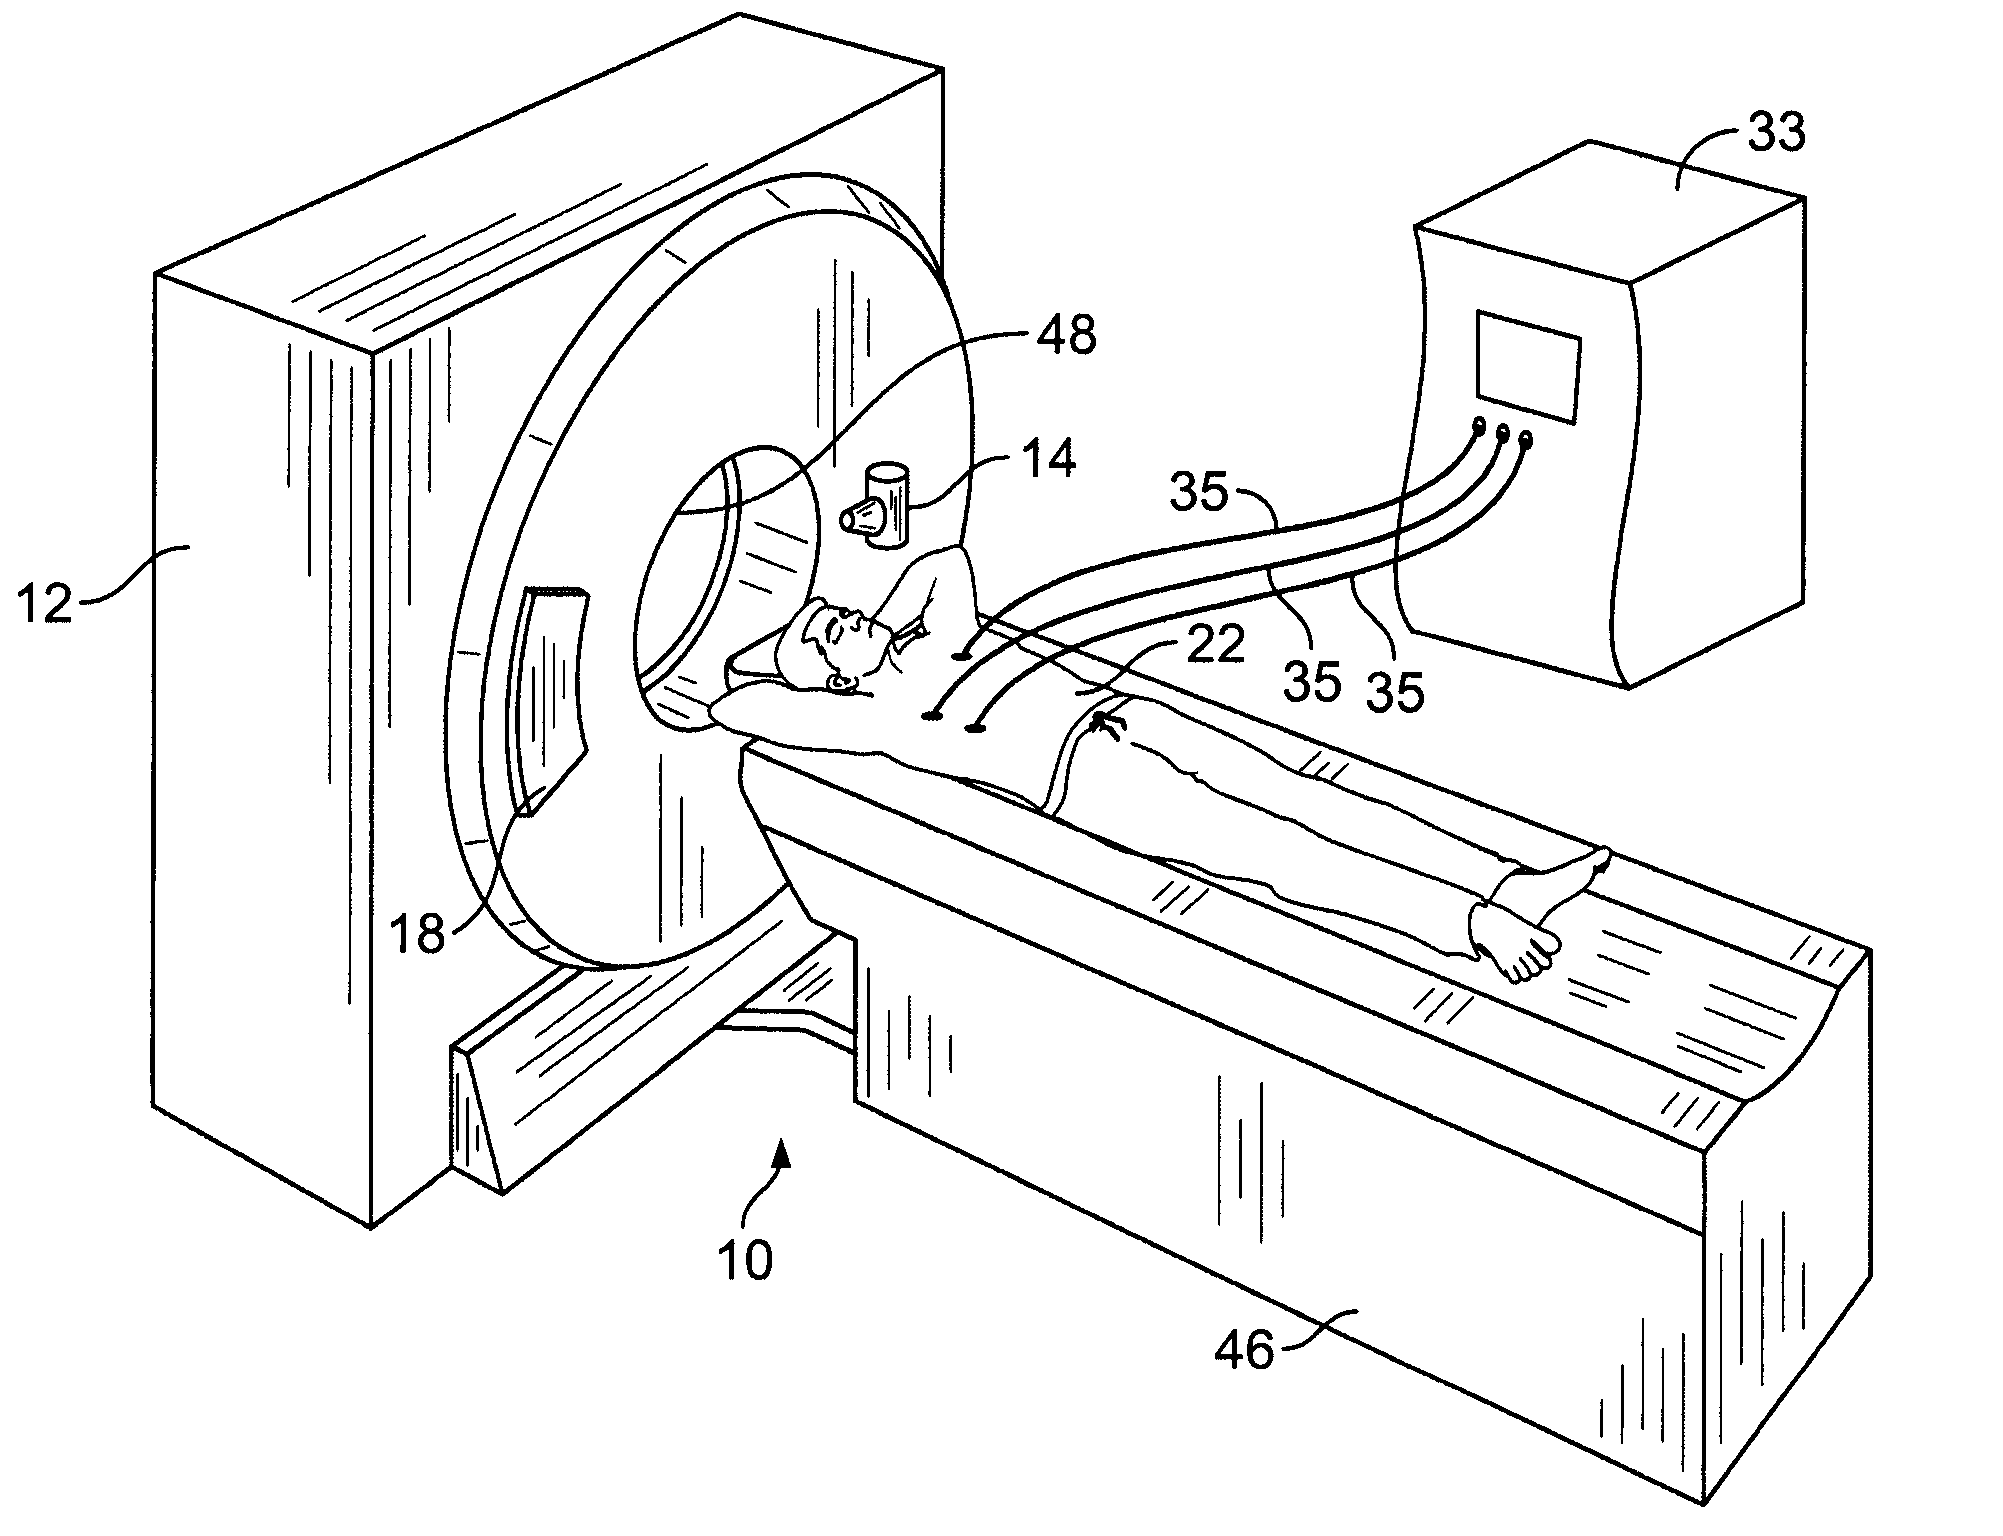 Method and apparatus for reconstructing images of moving structures based on temporal data